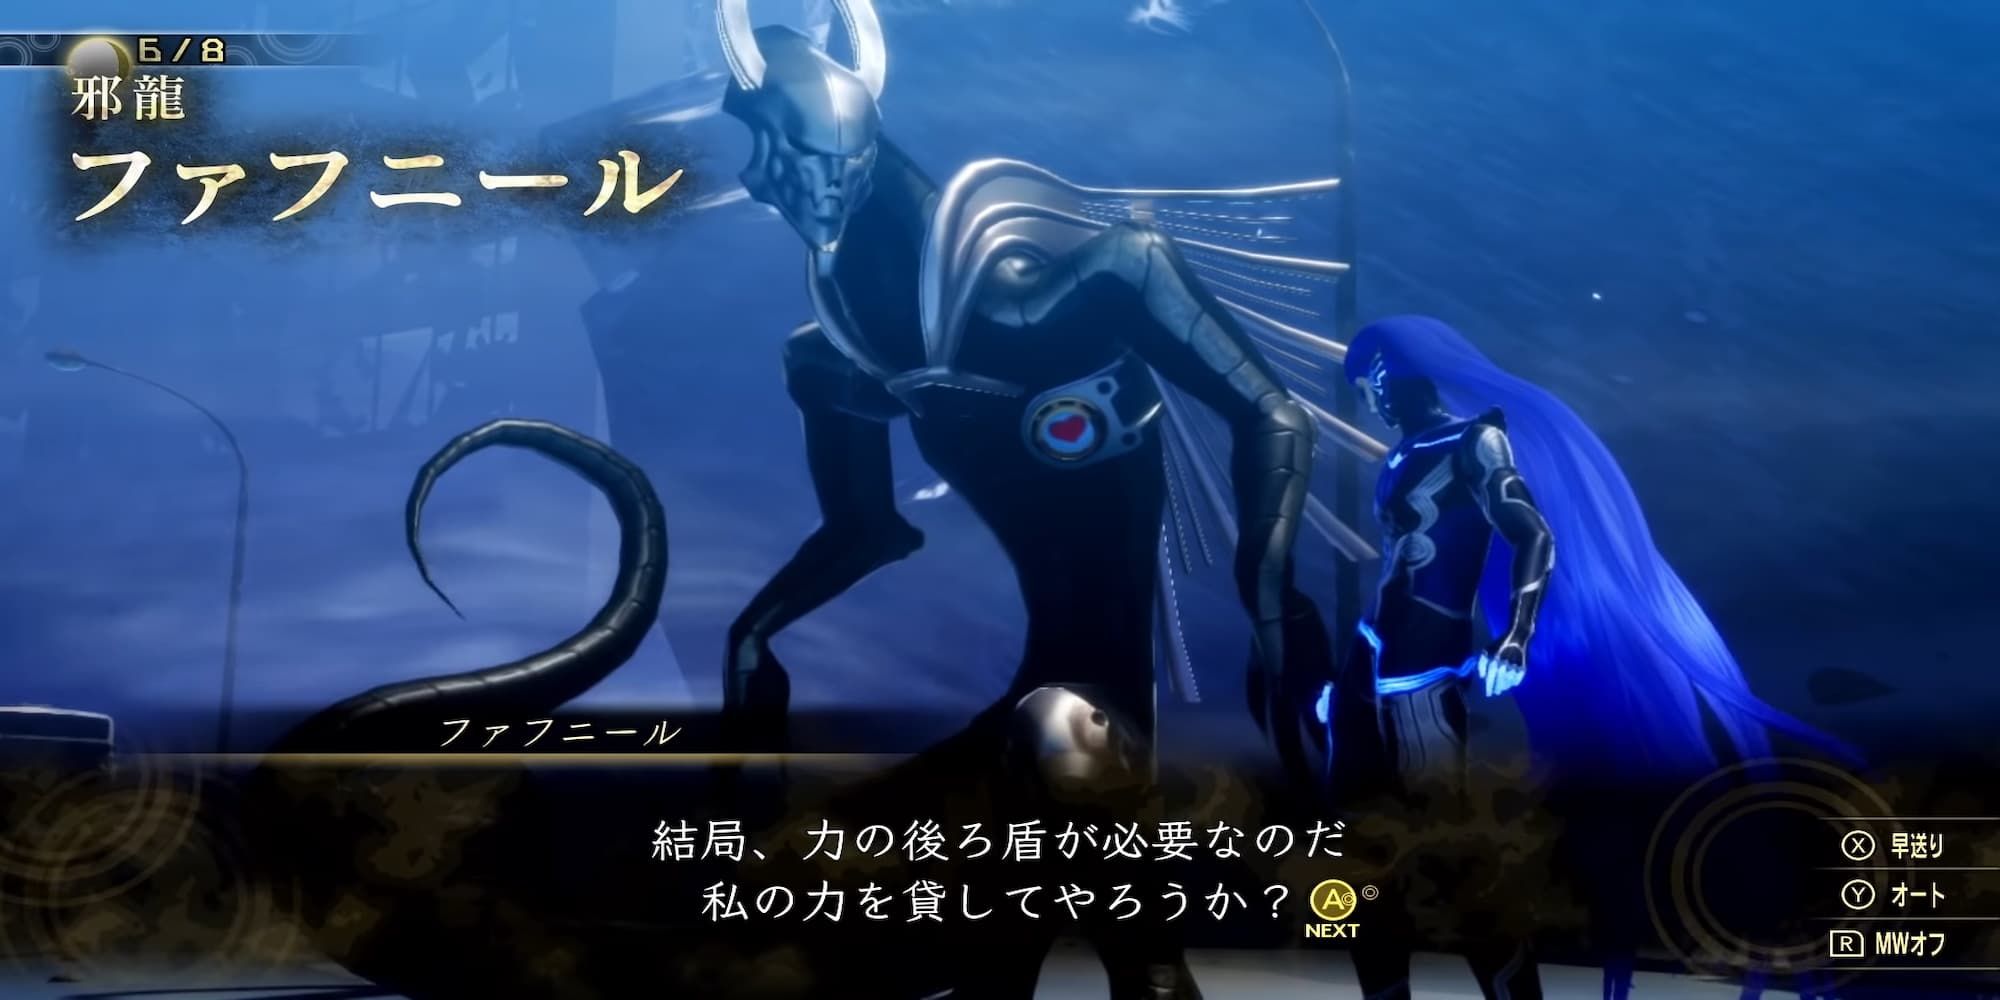 Shin Megami Tensei 5 Fafnir giant steel dragon with long tail looking down at protagonist